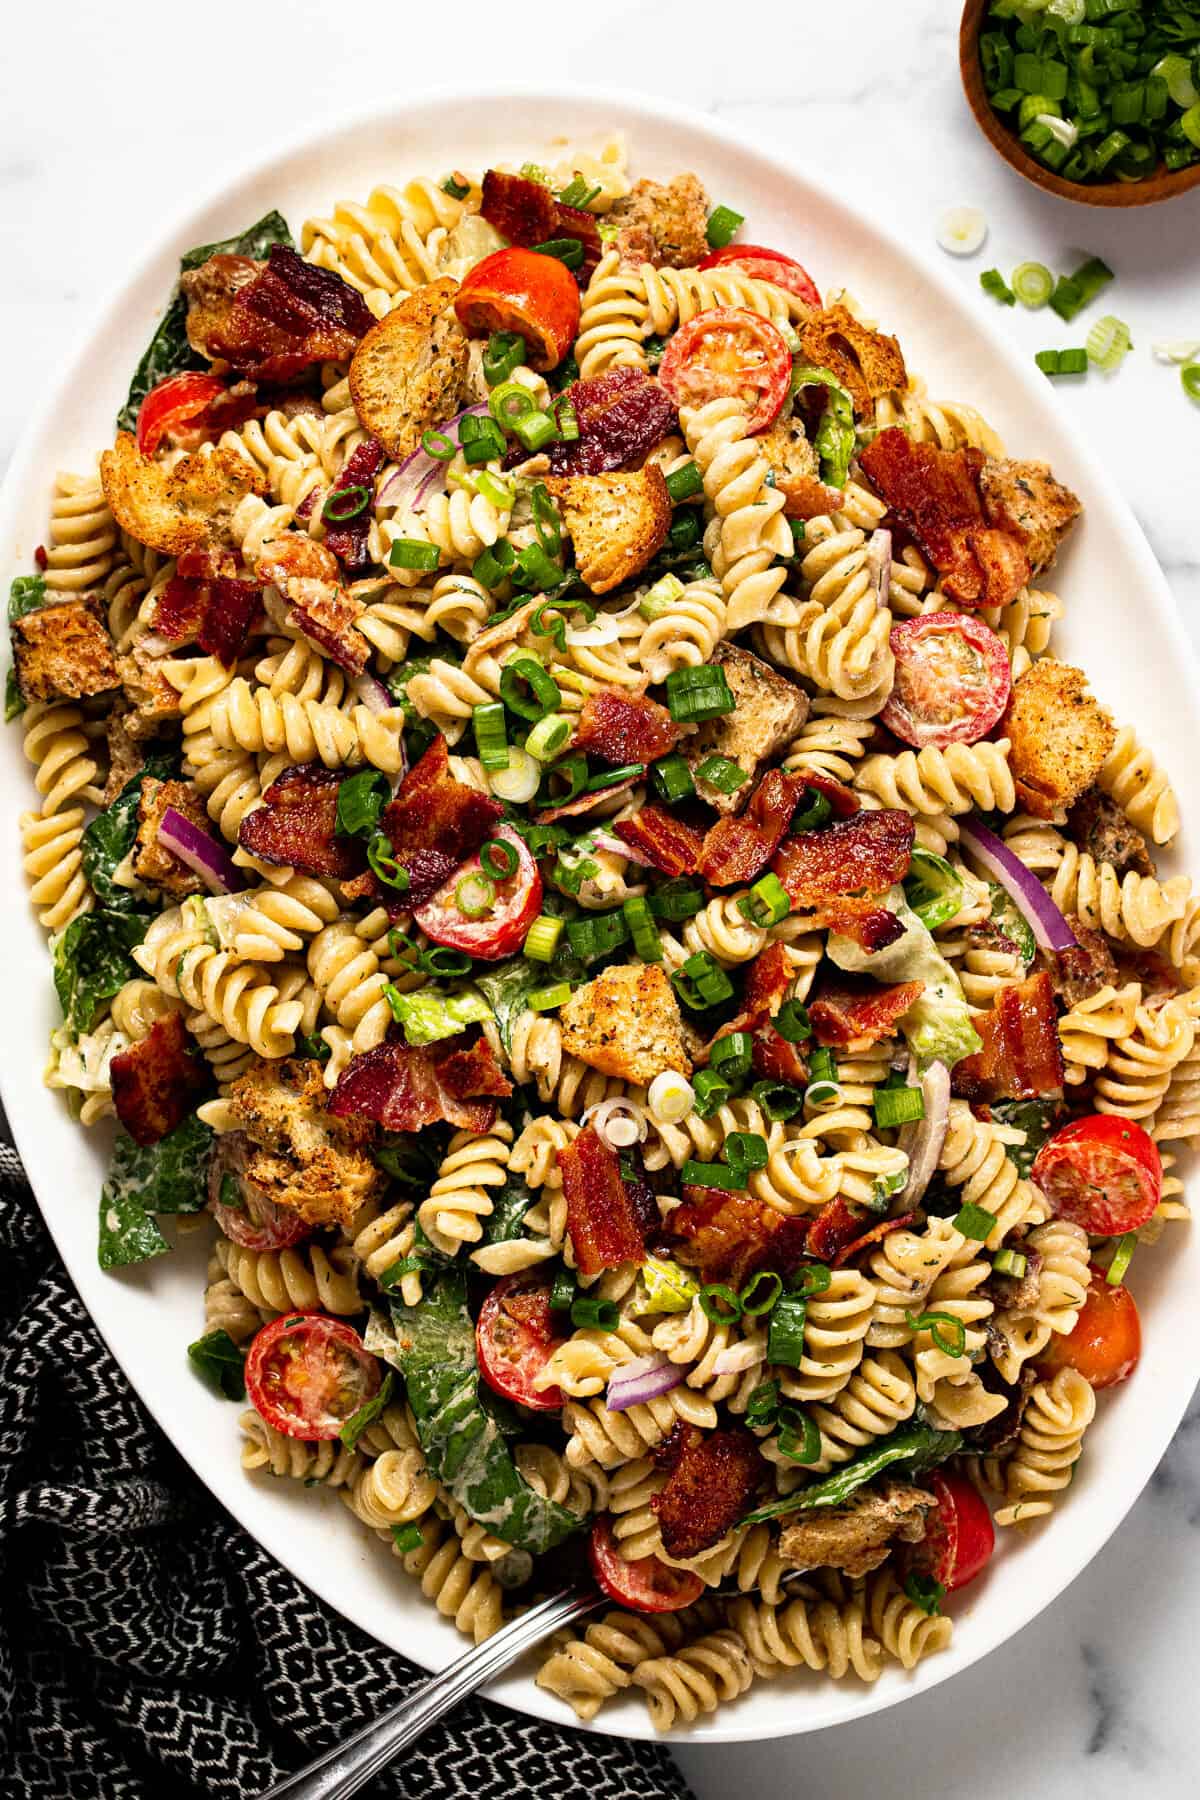 Large white platter filled with BLT pasta salad garnished with green onion